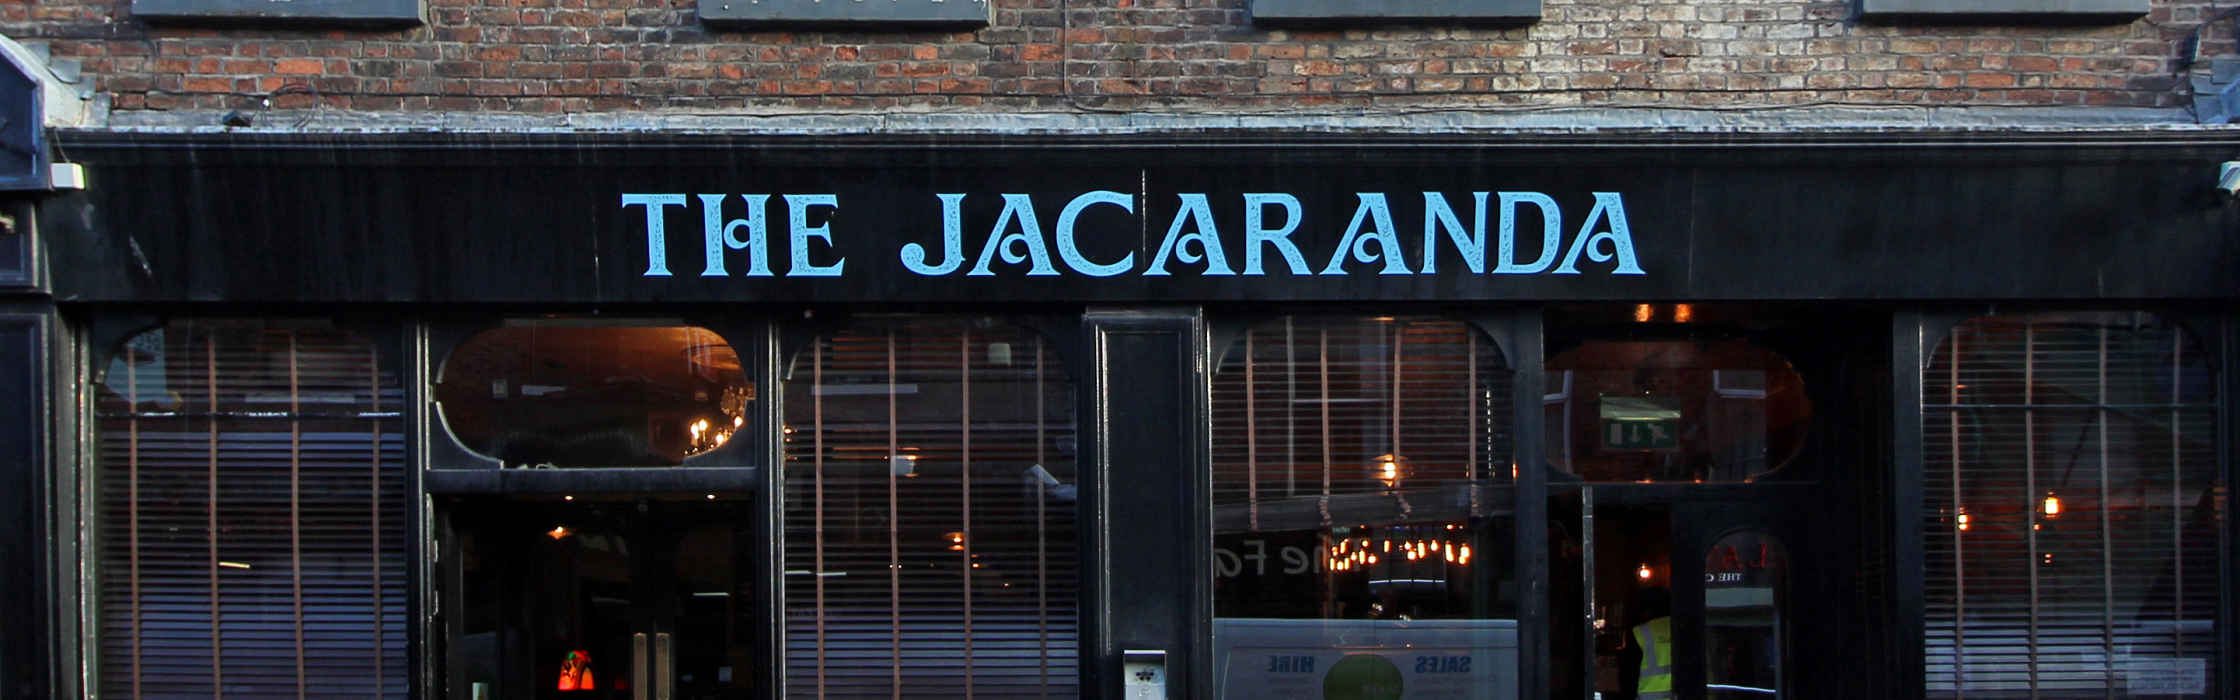 What's On at The Jacaranda Club, Liverpool